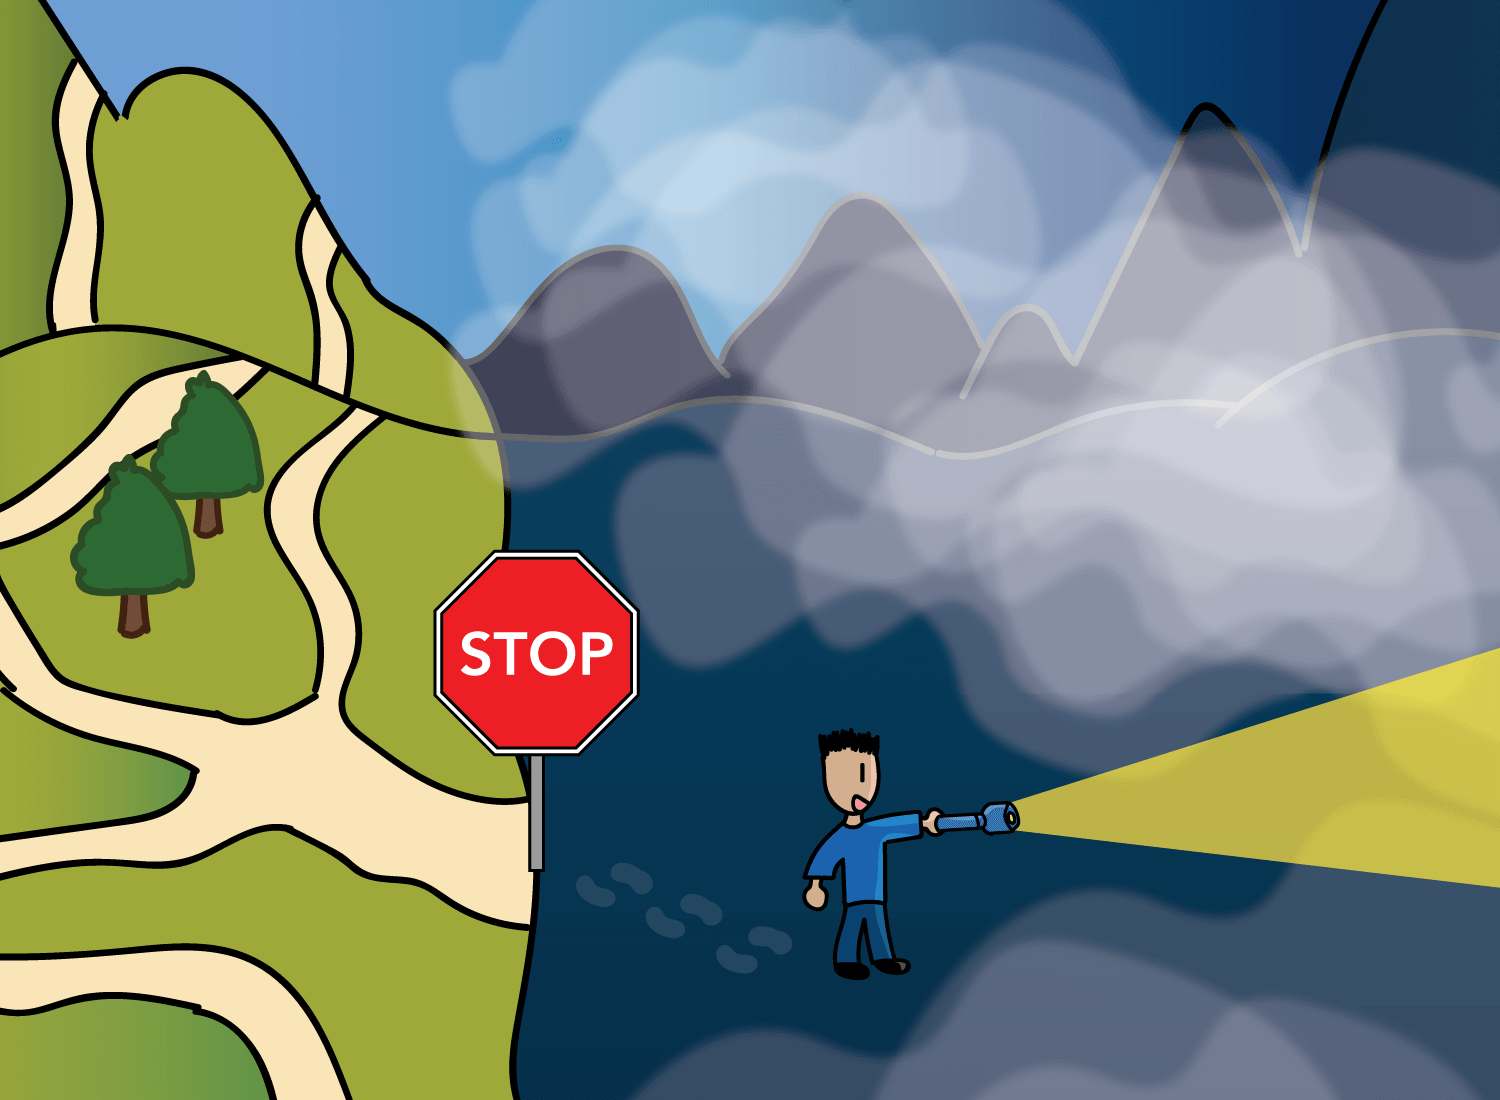 walking past the thought stop sign